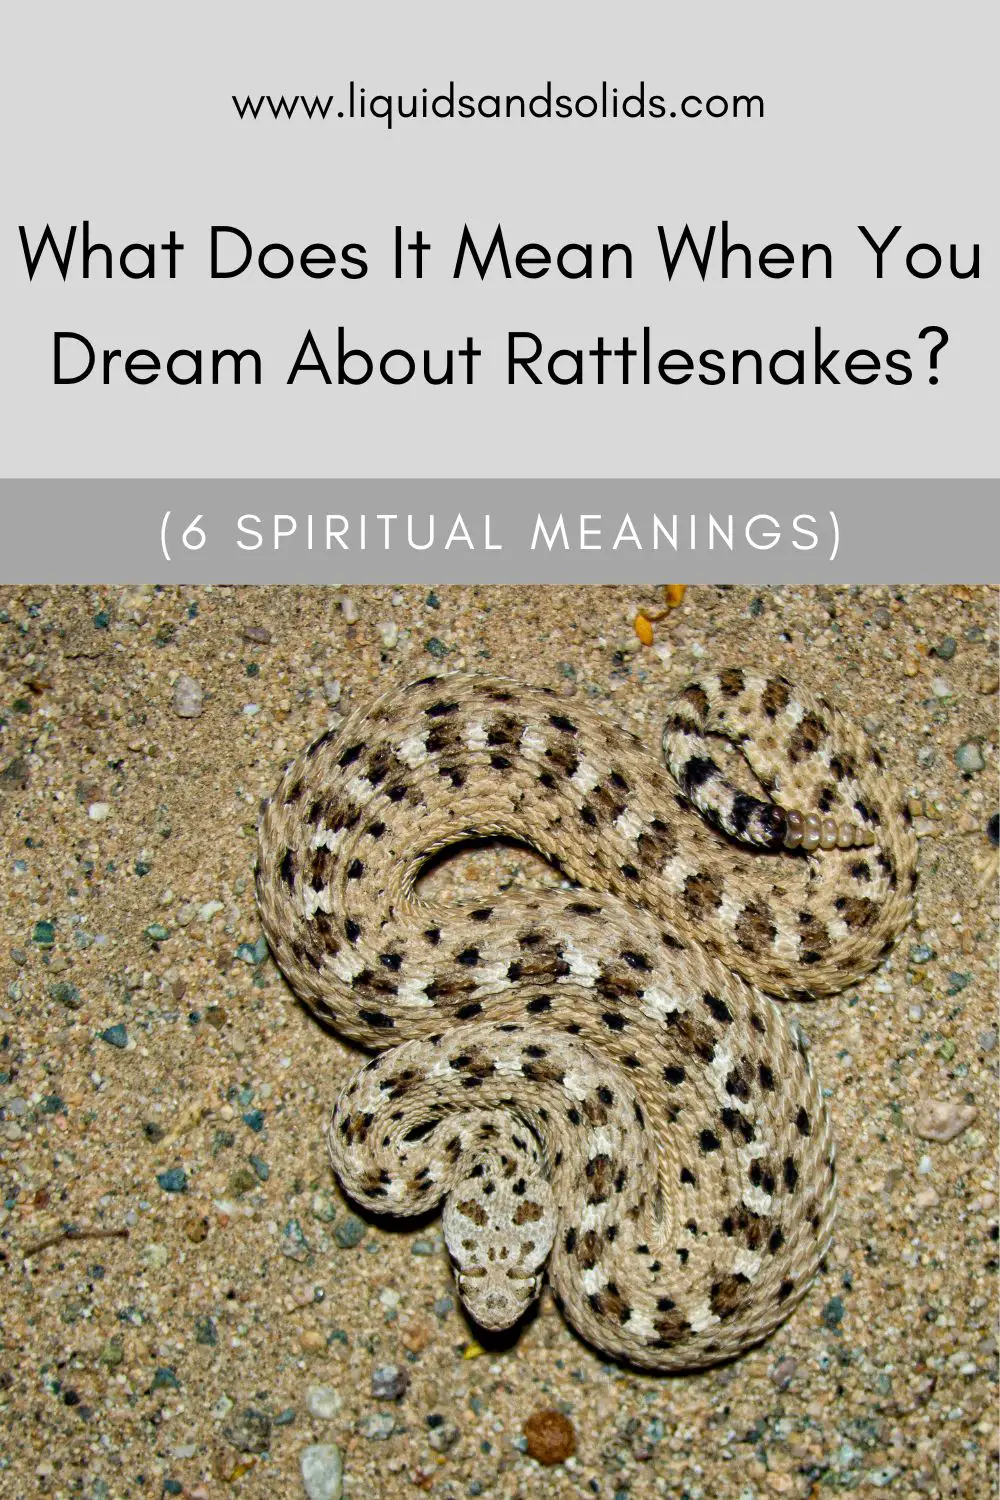 Common Meanings Of Rattlesnake Dreams